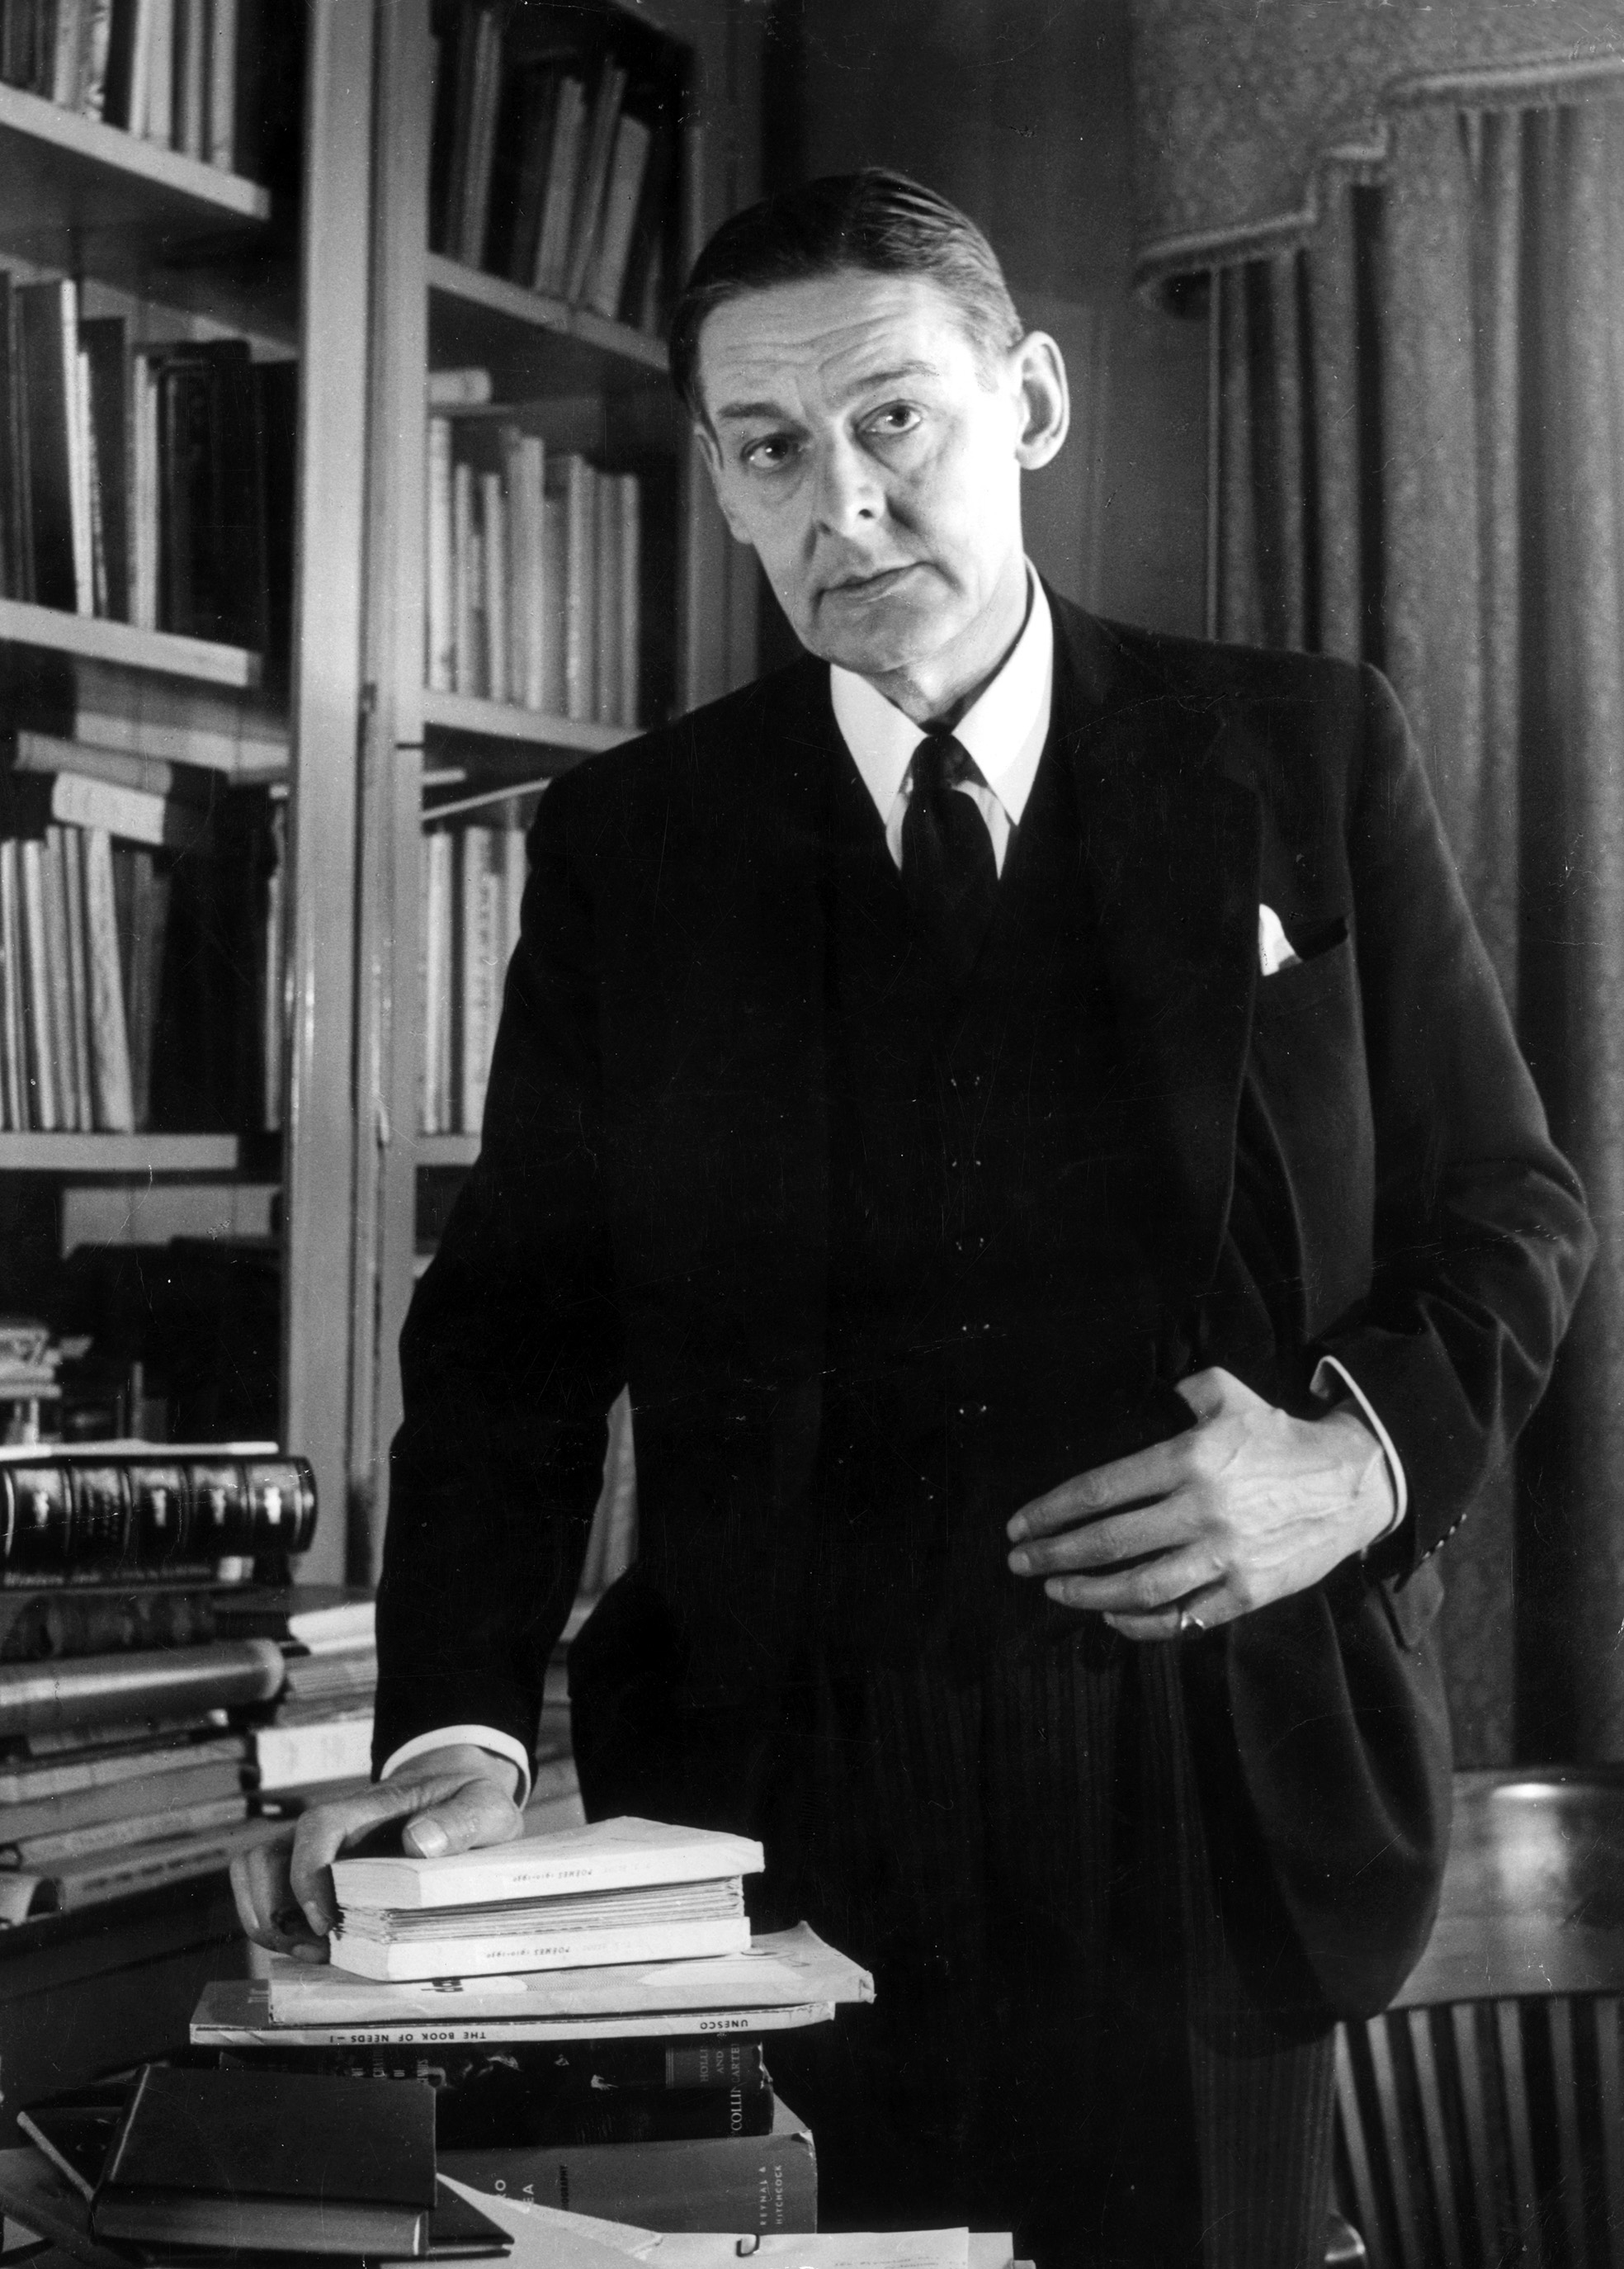 Anglo-American poet, critic and writer, TS Eliot (1888 - 1965), 1950. (Photo: John Gay / Hulton Archive / Getty Images)